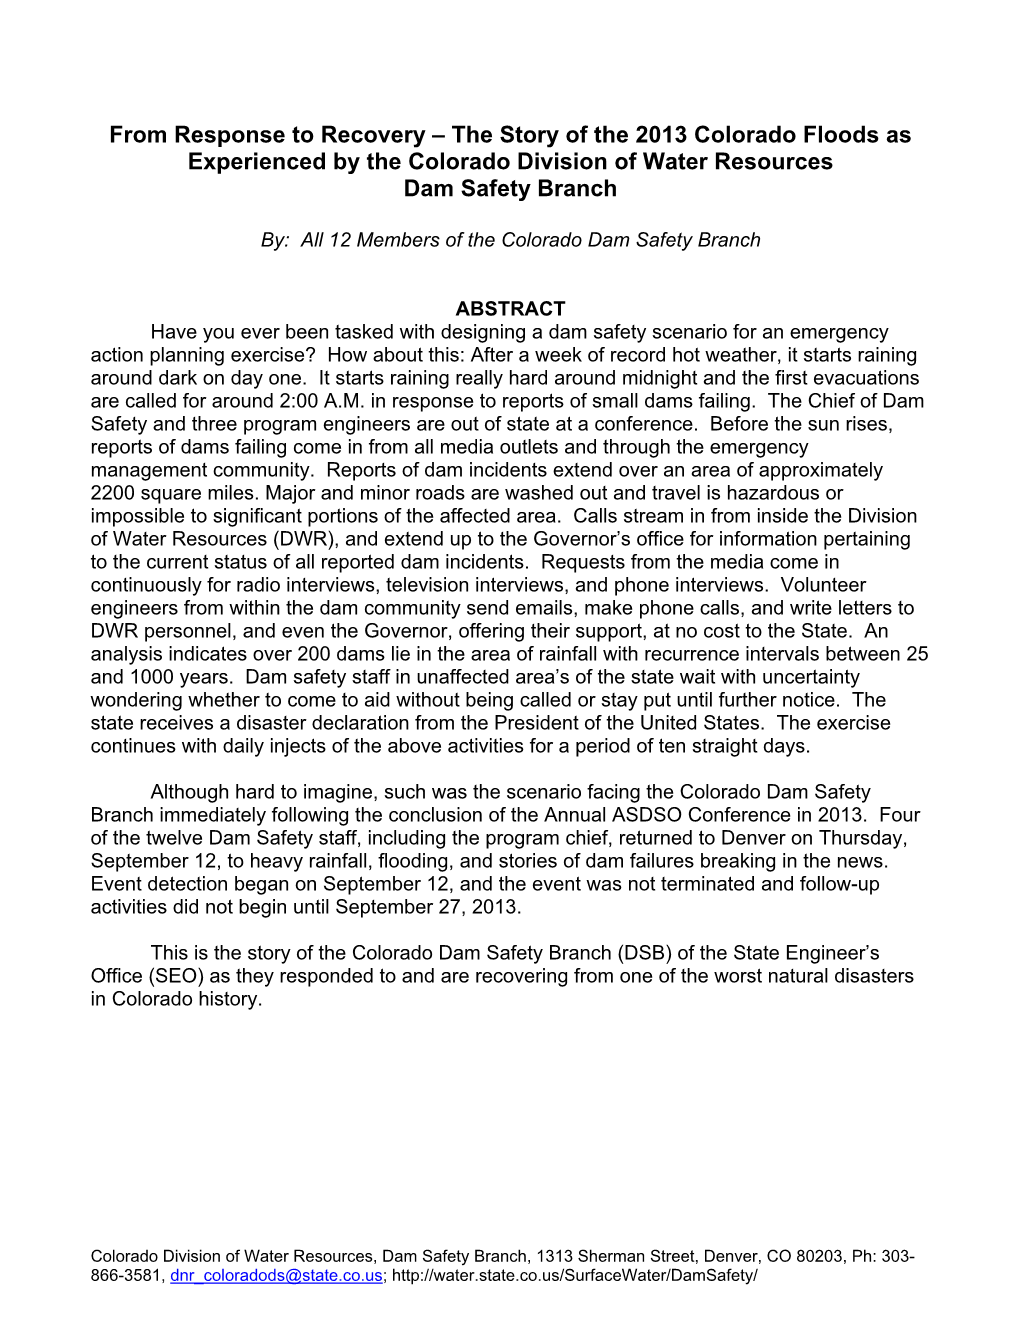 The Story of the 2013 Colorado Floods As Experienced by the Colorado Division of Water Resources Dam Safety Branch